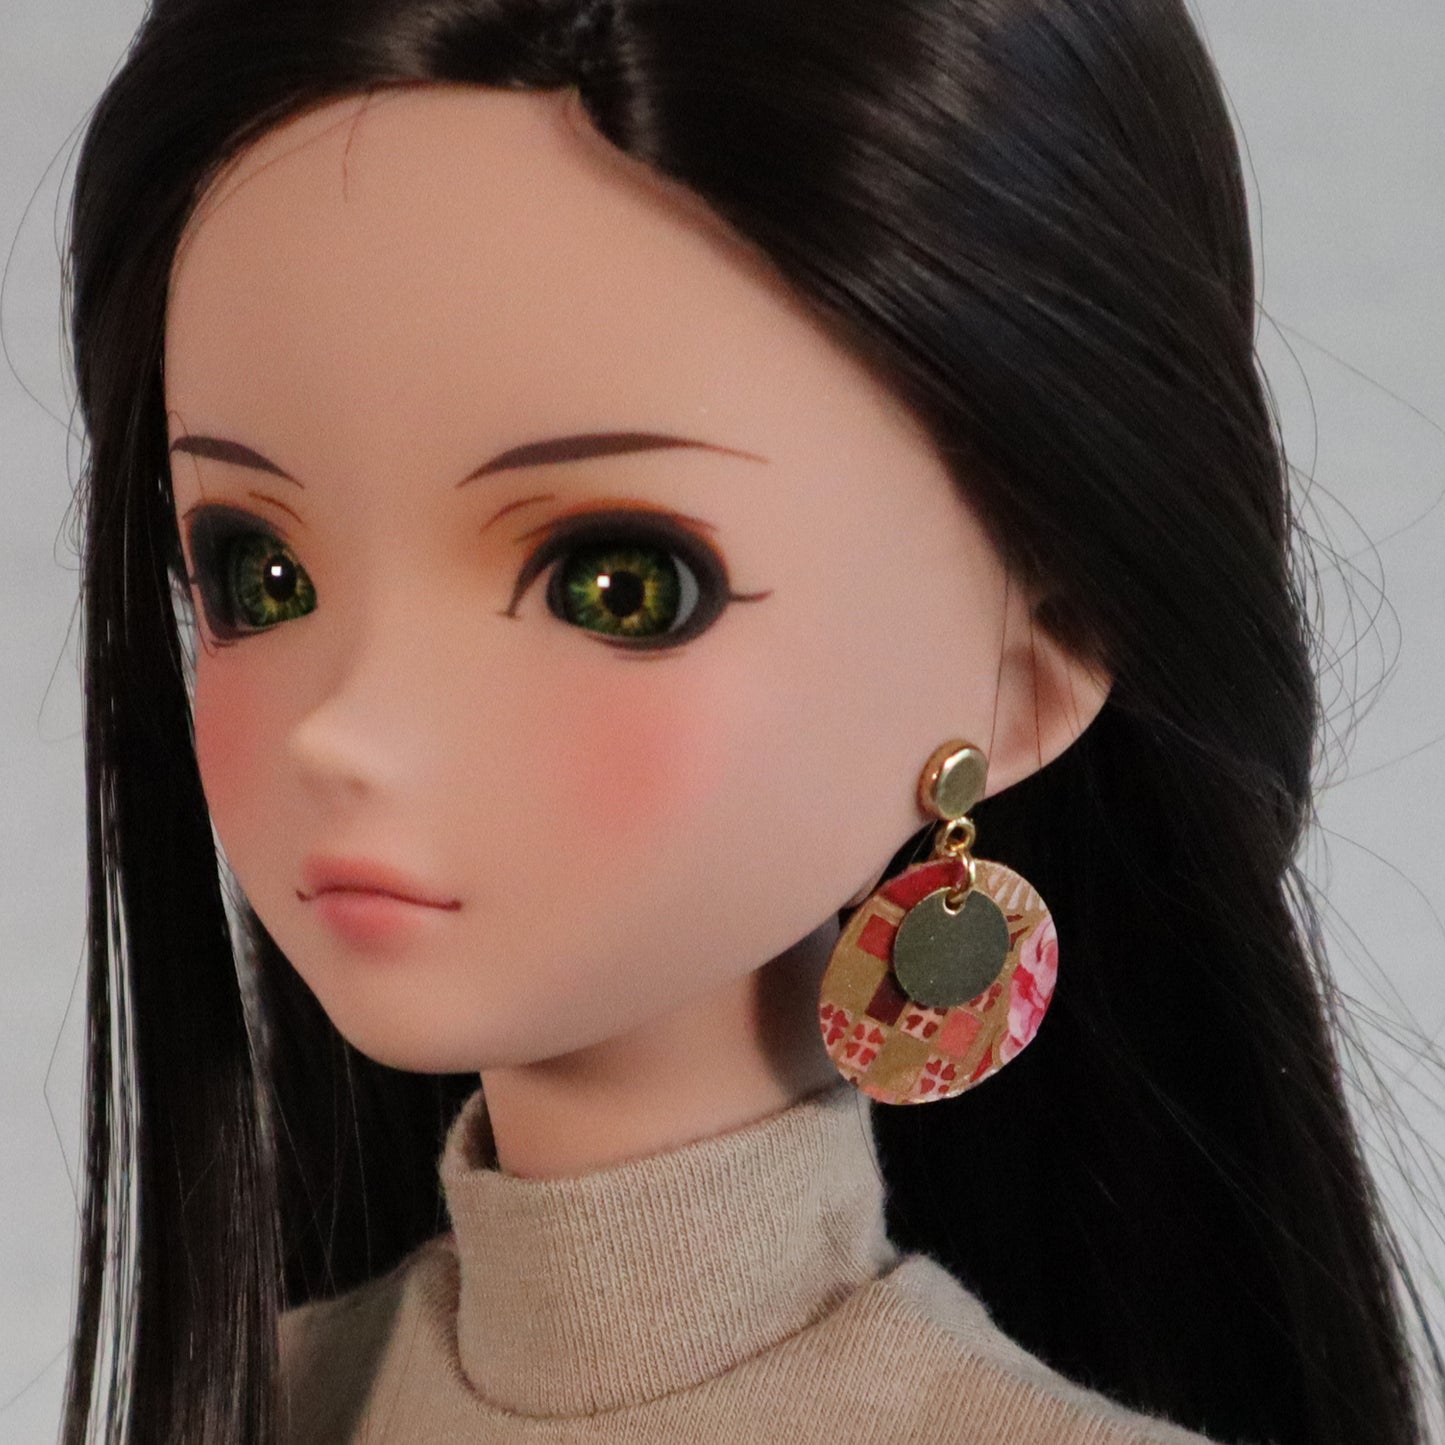 No-Hole Earrings for Vinyl Dolls  - Red Floral Washi Disc